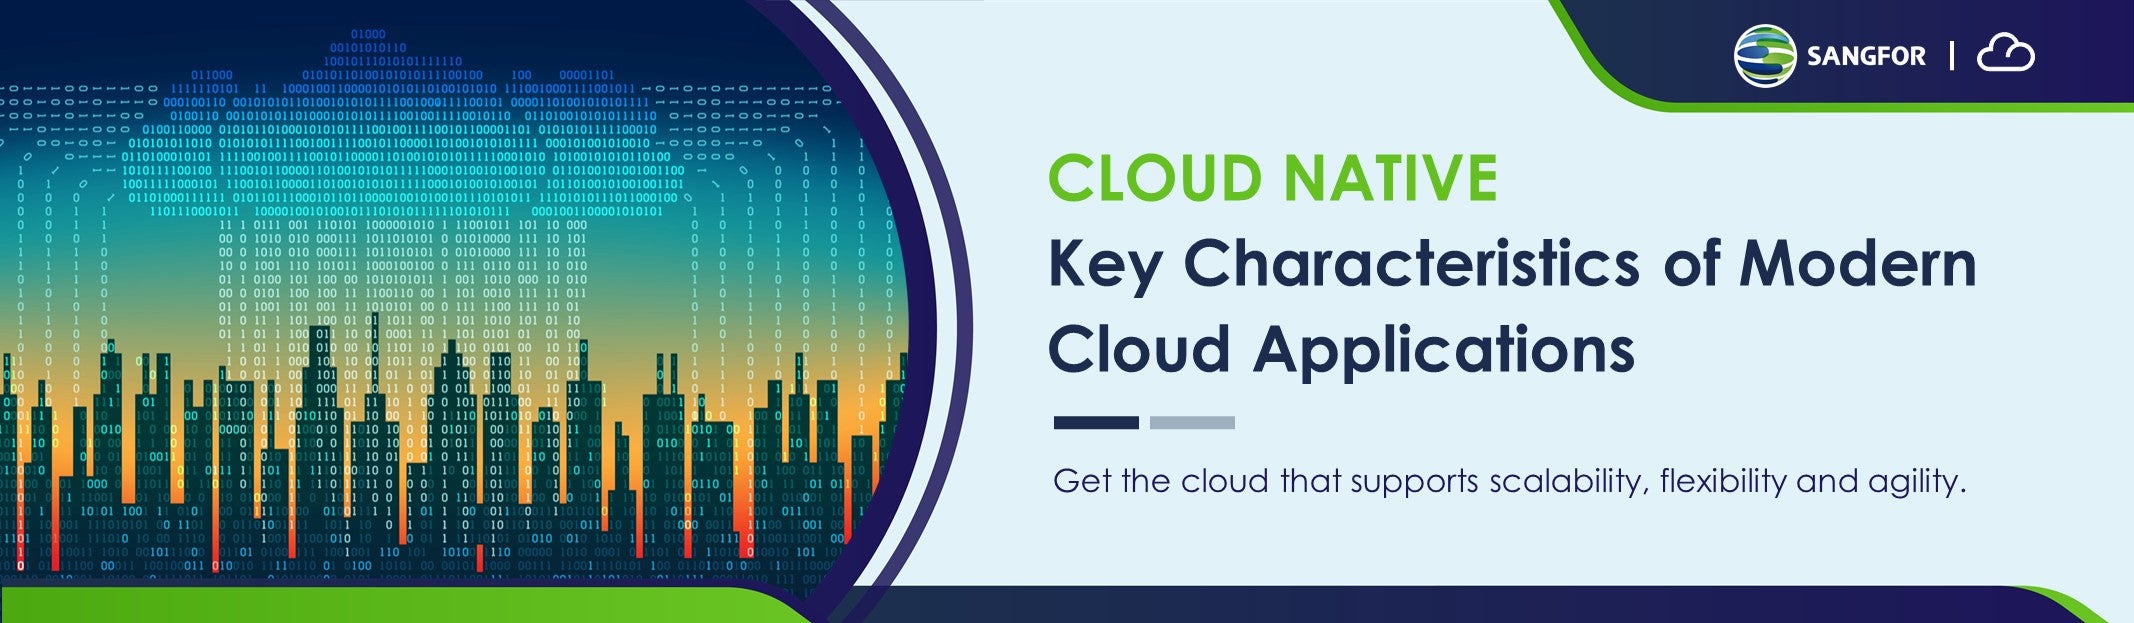 build cloud native applications infrastructure